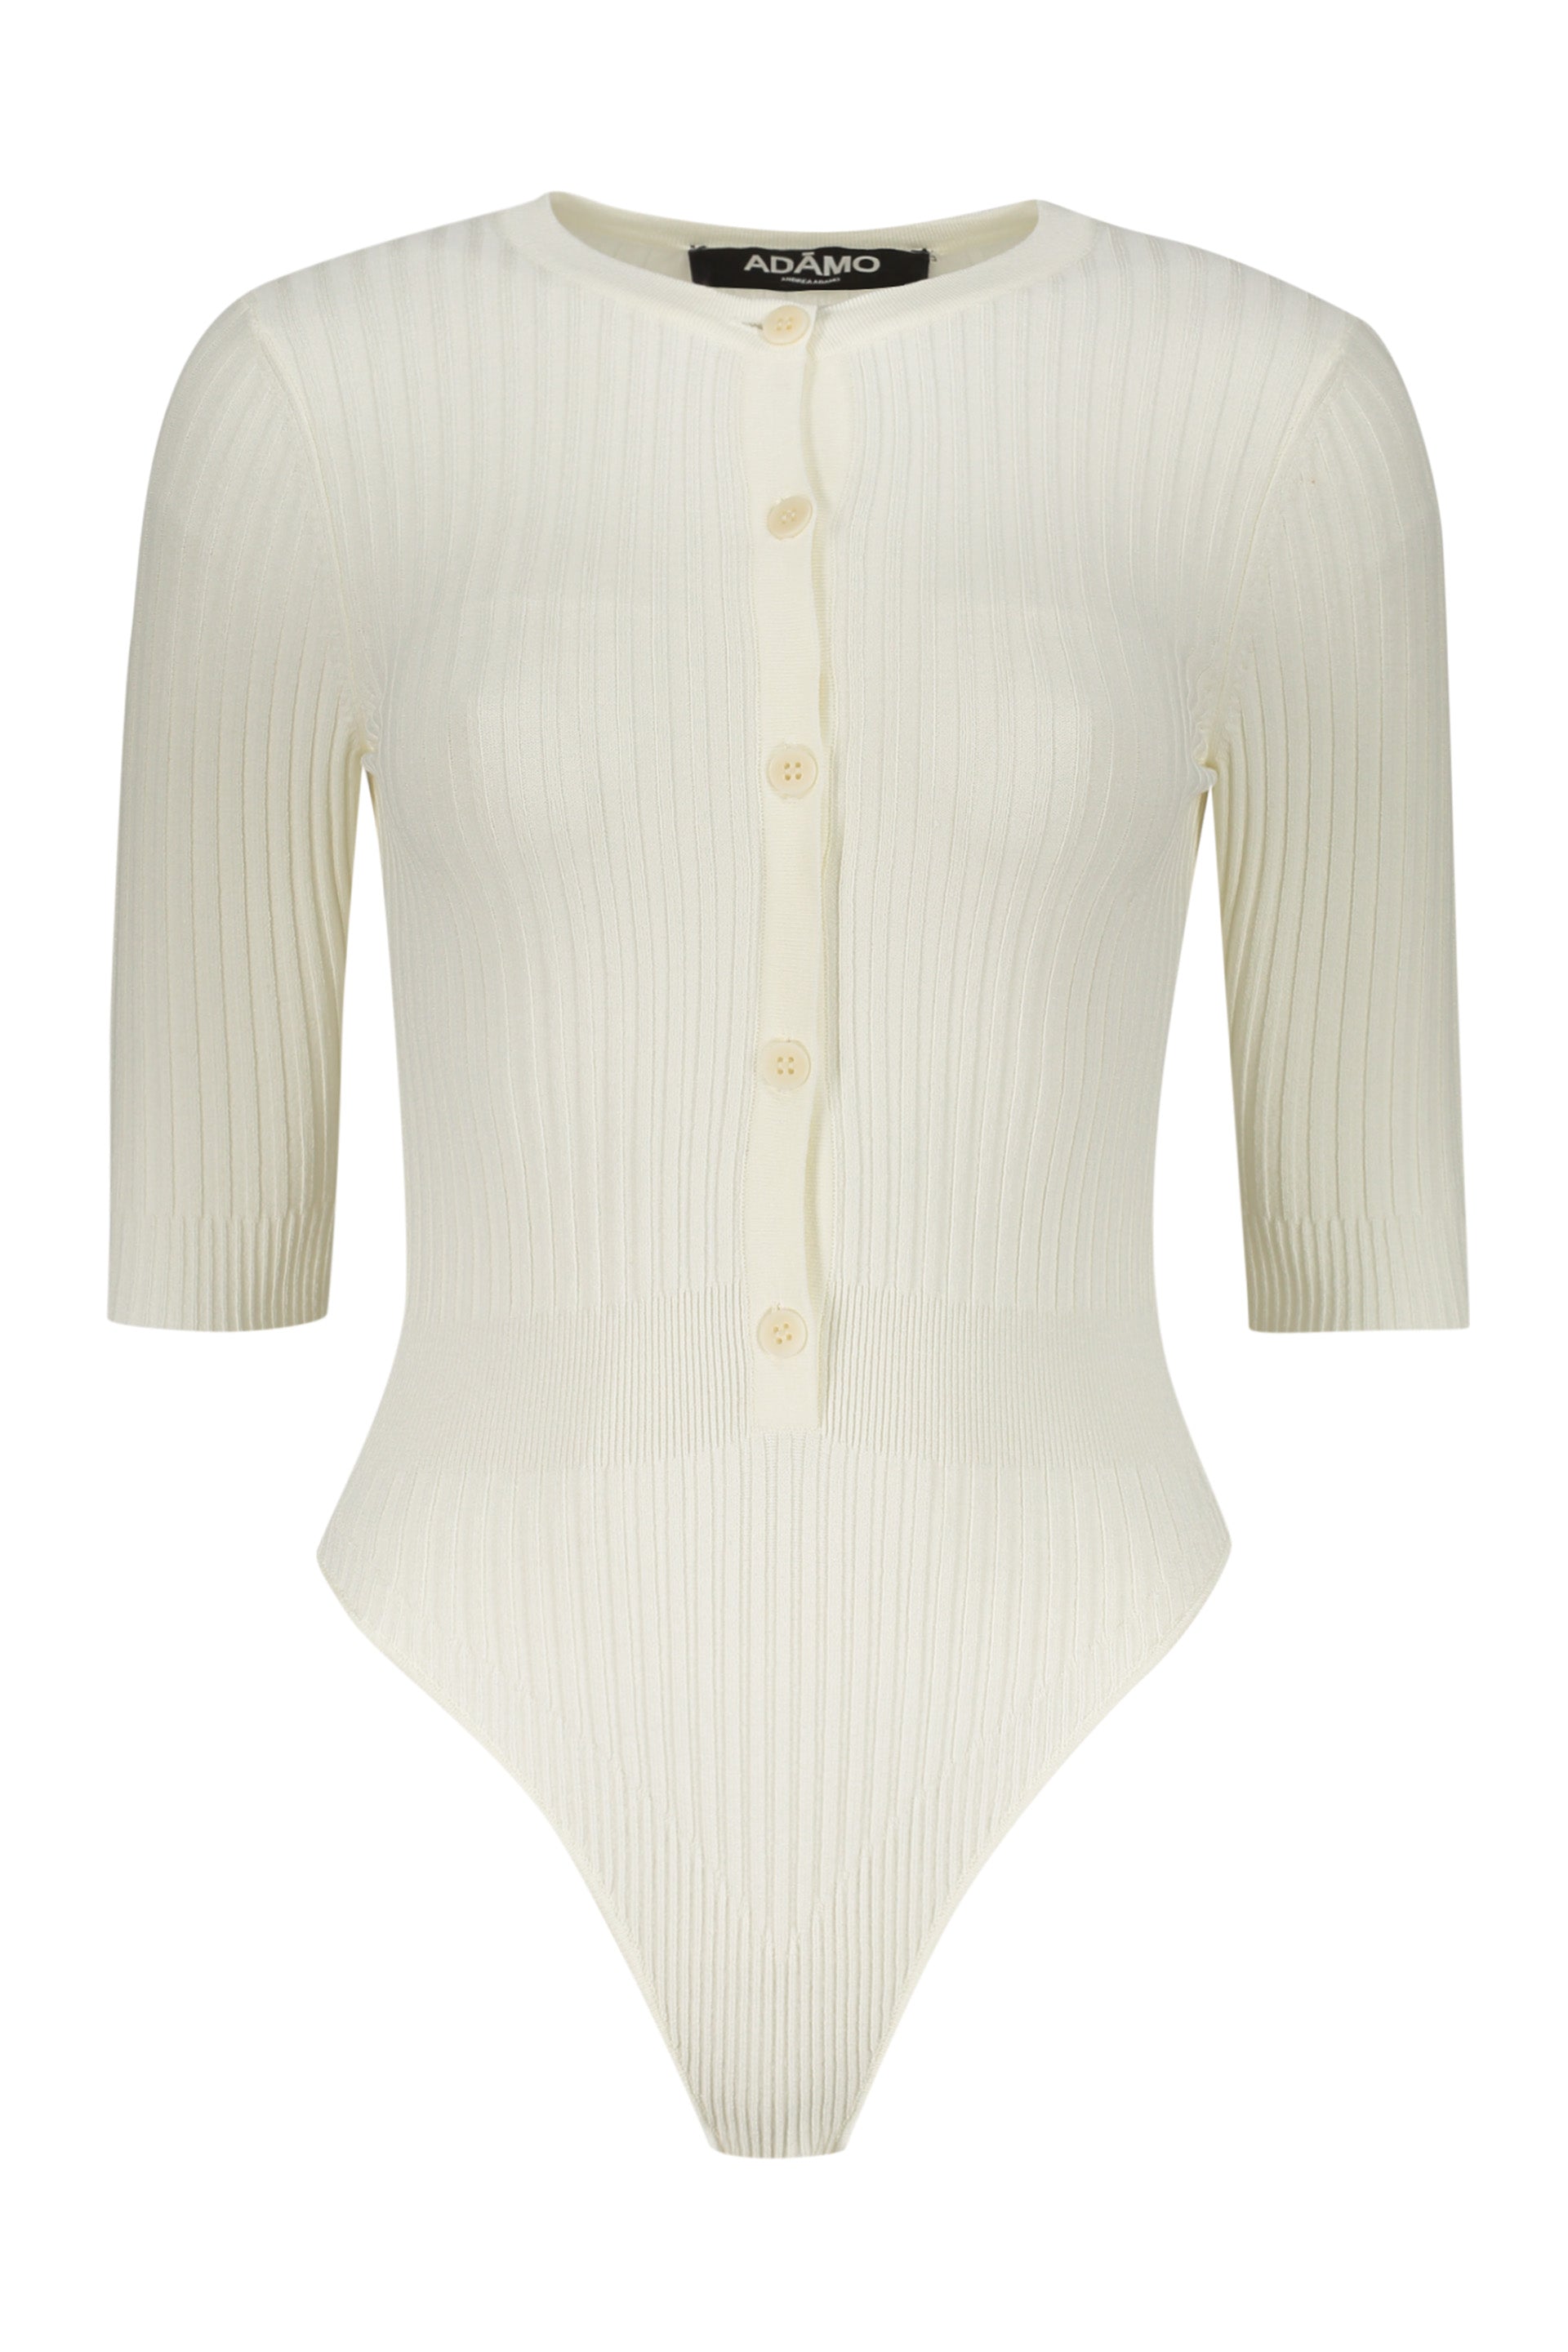 ANDREADAMO-OUTLET-SALE-Ribbed-knit-bodysuit-Shirts-S-ARCHIVE-COLLECTION.jpg